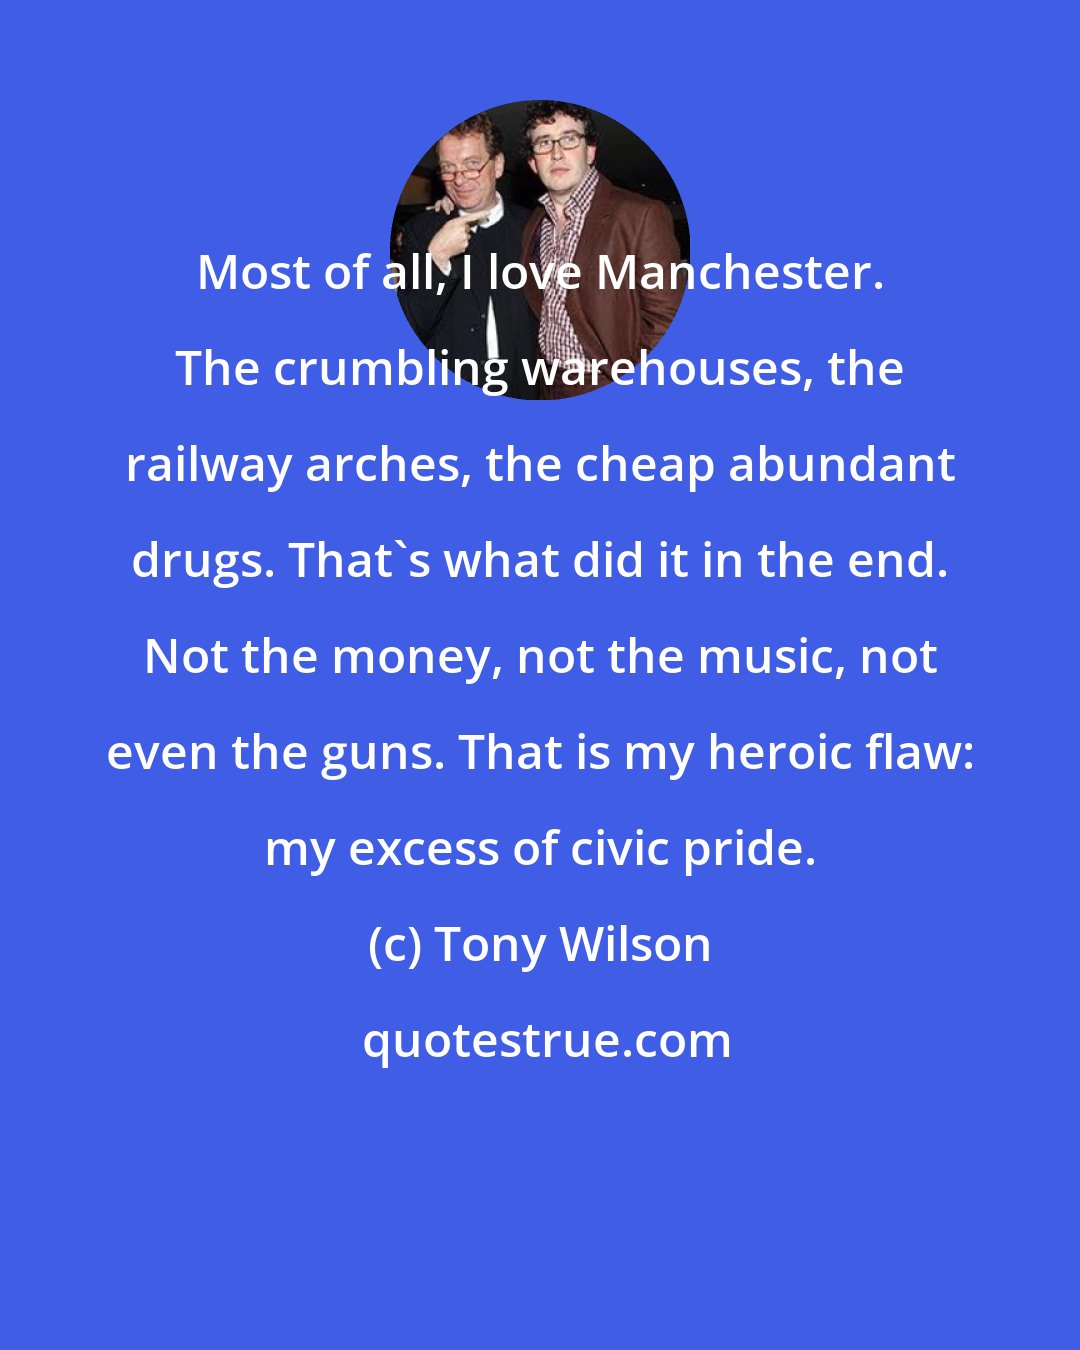 Tony Wilson: Most of all, I love Manchester. The crumbling warehouses, the railway arches, the cheap abundant drugs. That's what did it in the end. Not the money, not the music, not even the guns. That is my heroic flaw: my excess of civic pride.